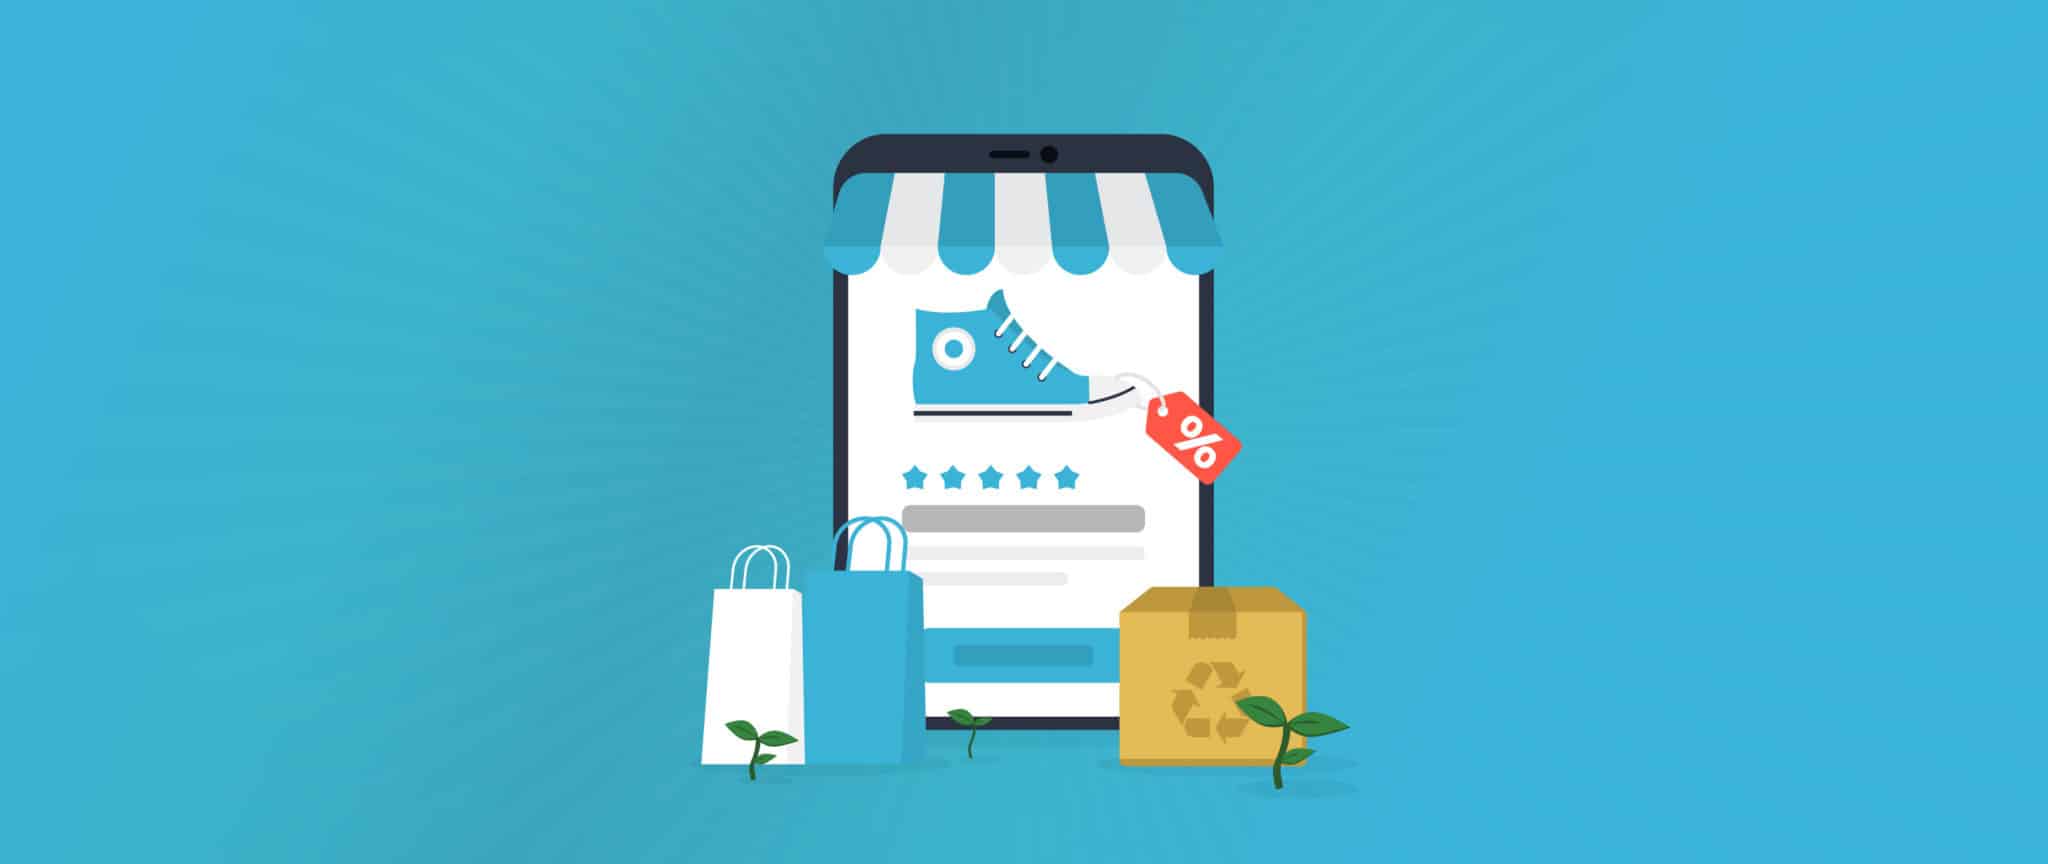 Shopping bags on the left, a smartphone in the center, and recycled packaging on the right indicate some of the top eCommerce trends of 2021.